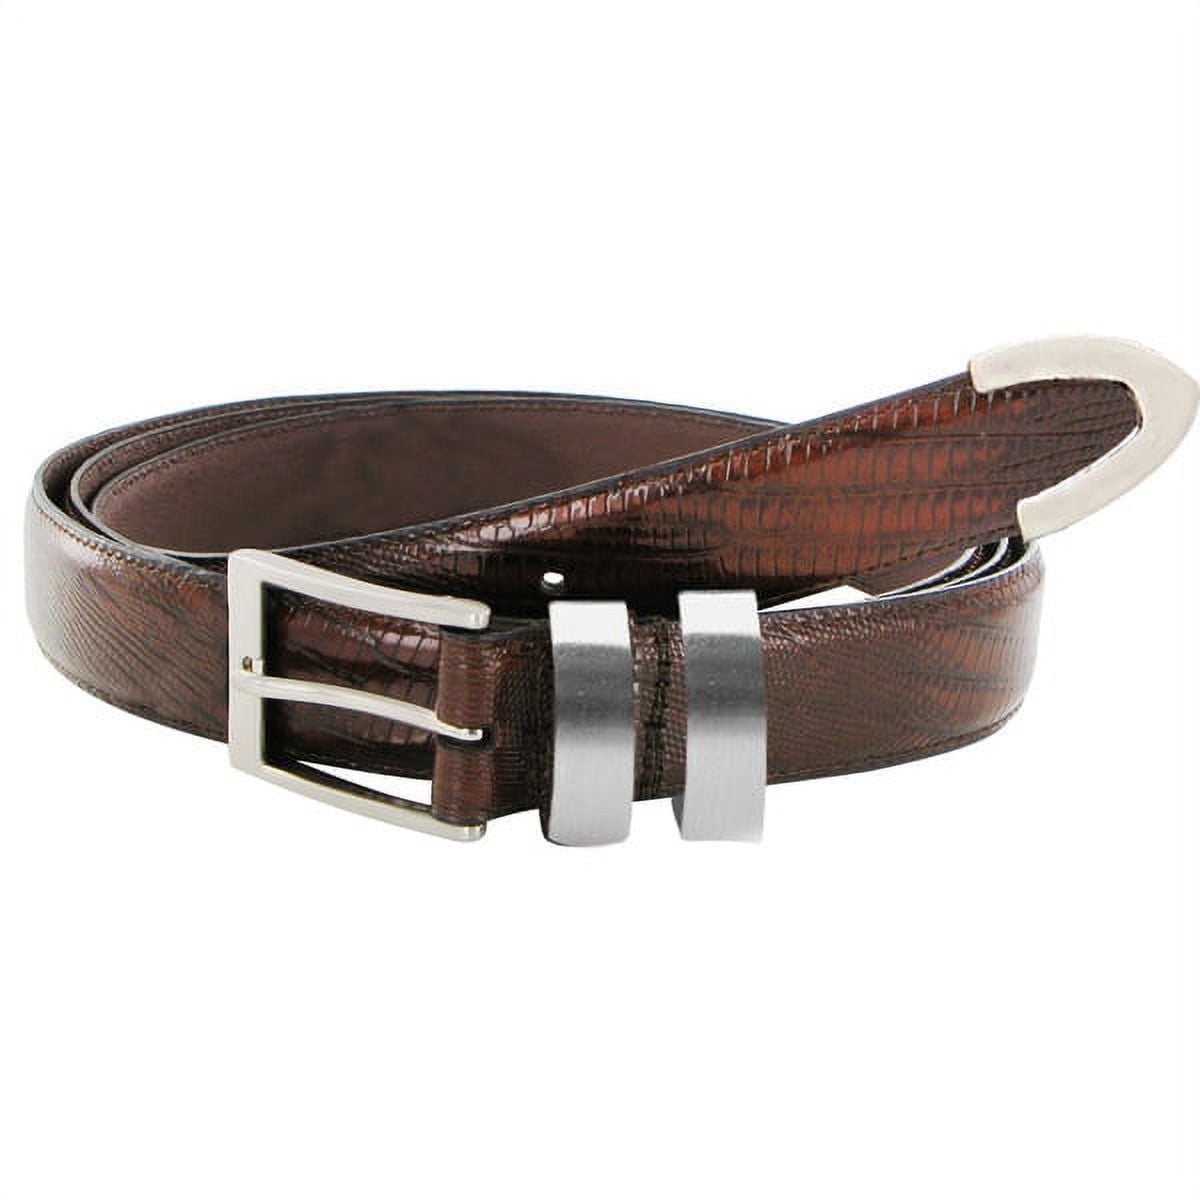 Totes-Isotoner Z0360693-2001xl 54-56 Lizard Texture Leather Belt with ...